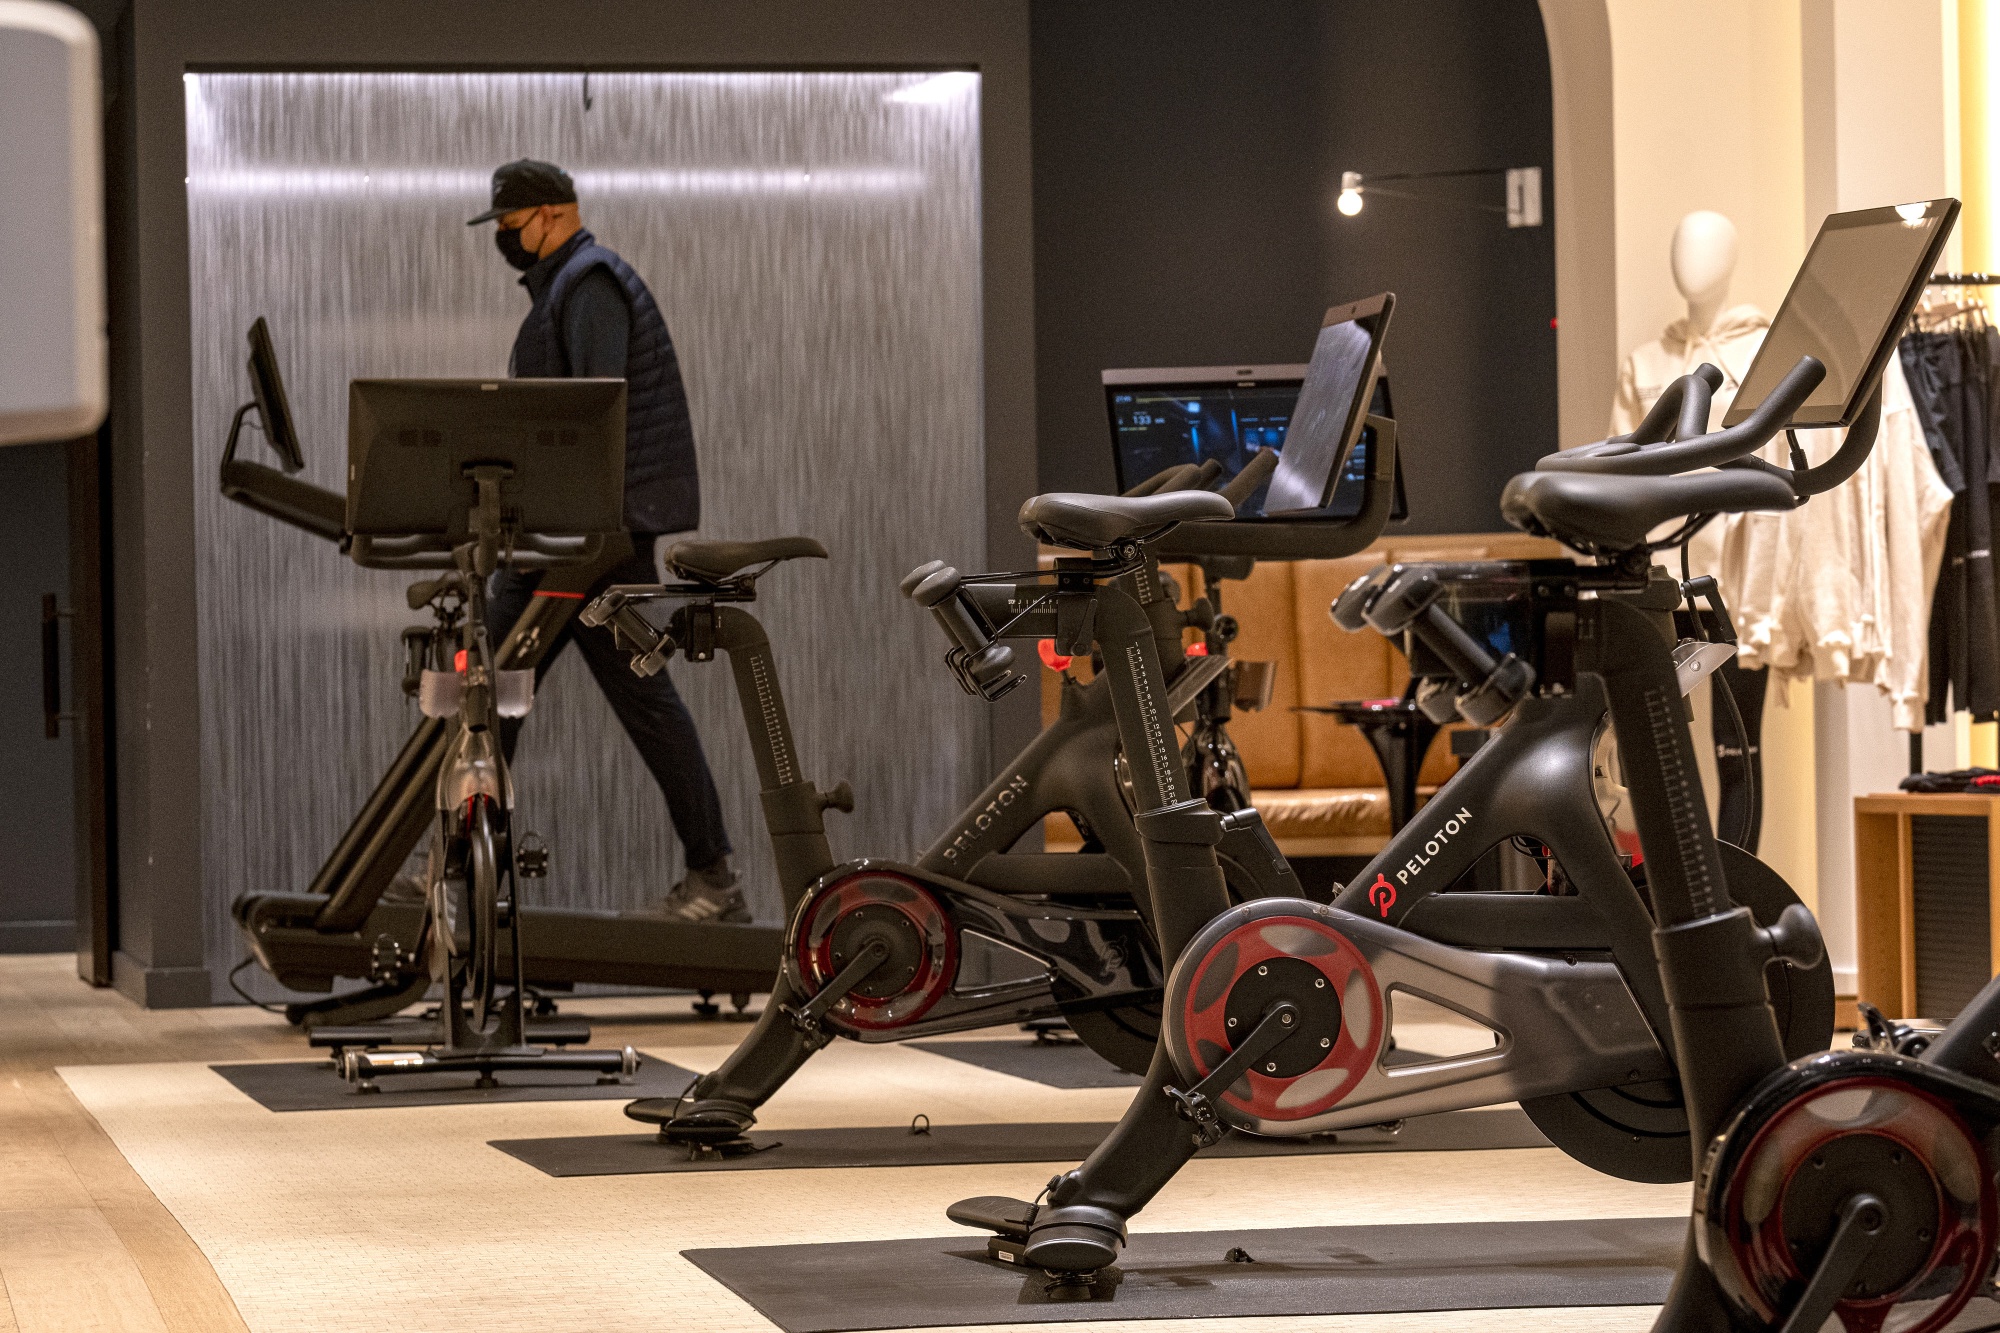 How Will Peloton (PTON) Make a Comeback? It Should Stop Making